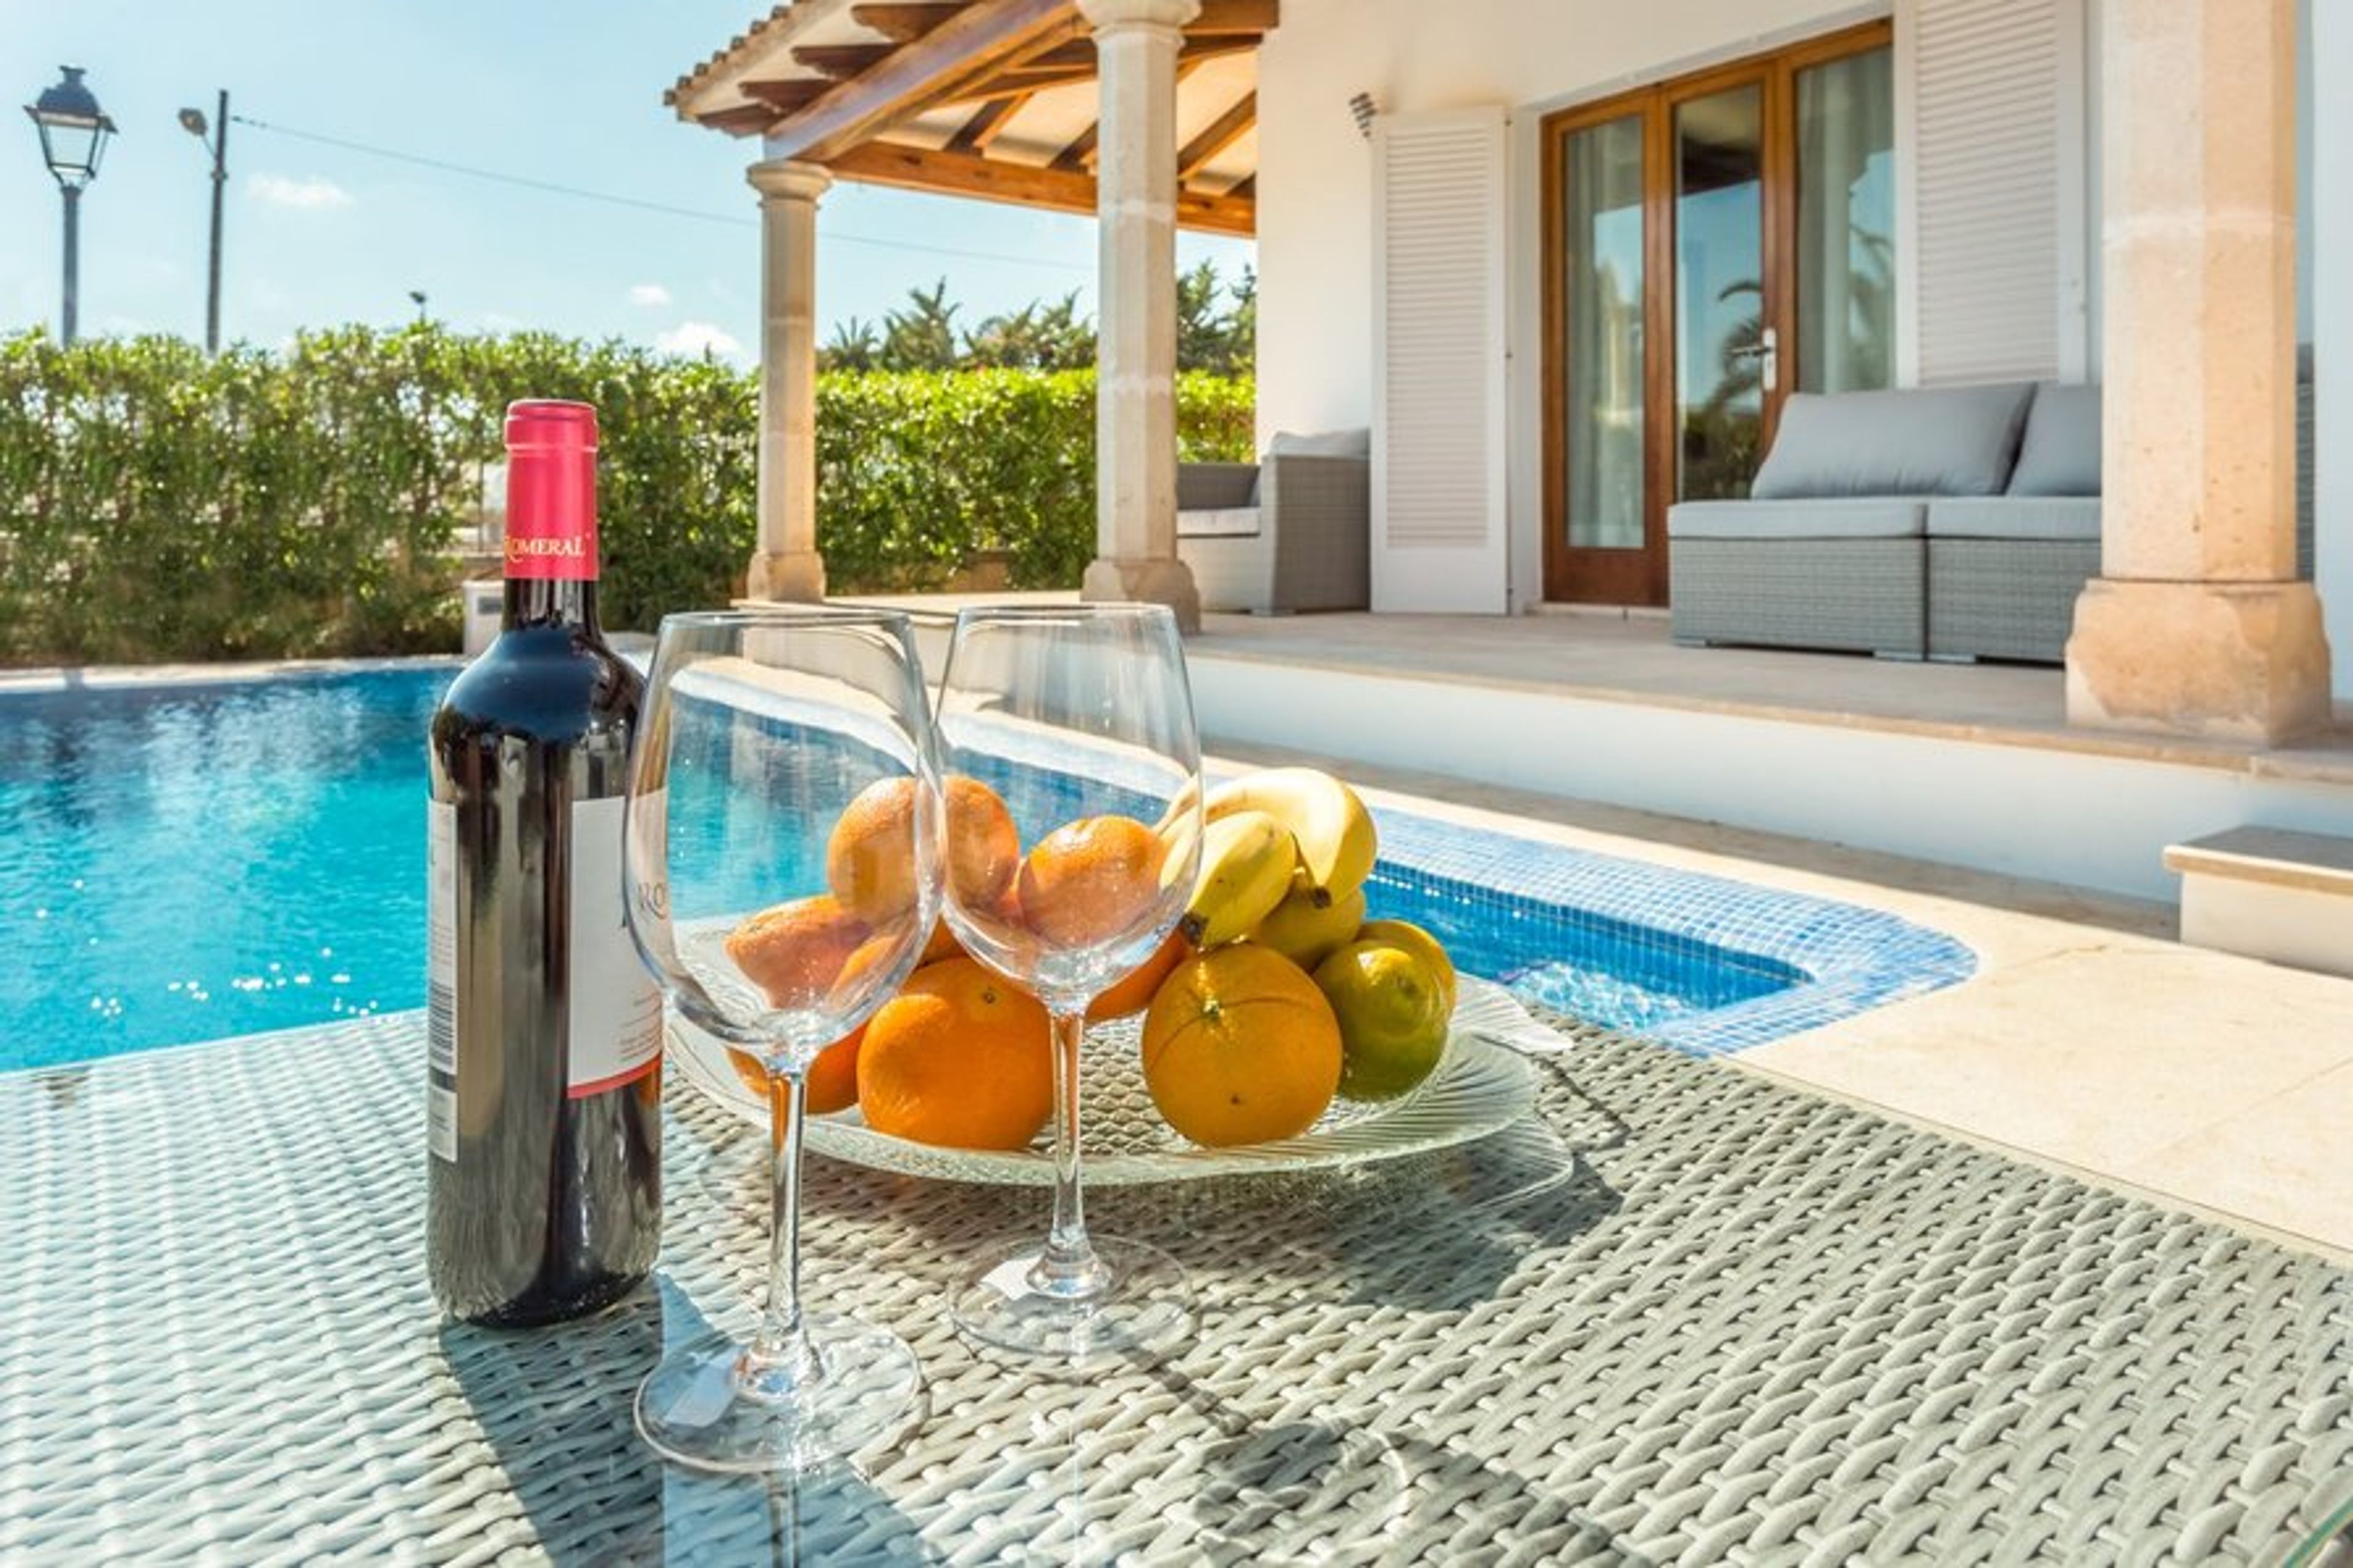 Enjoy a relaxing glass of wine by the pool deck.